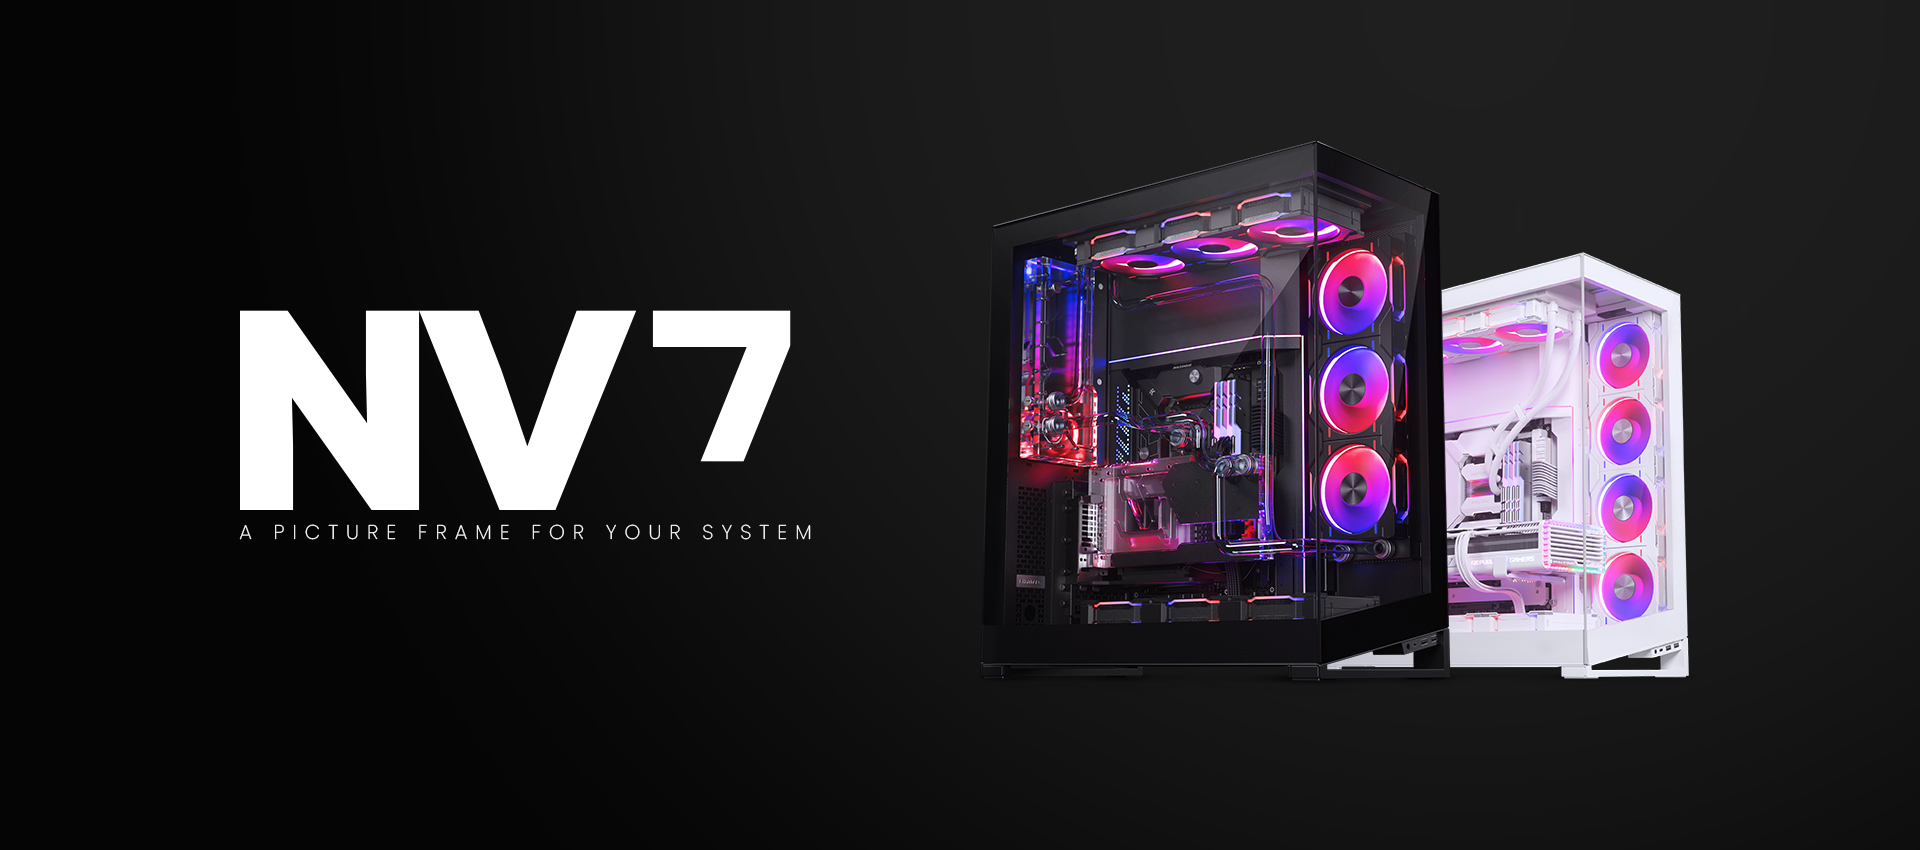 Banner image of NV7 chassis